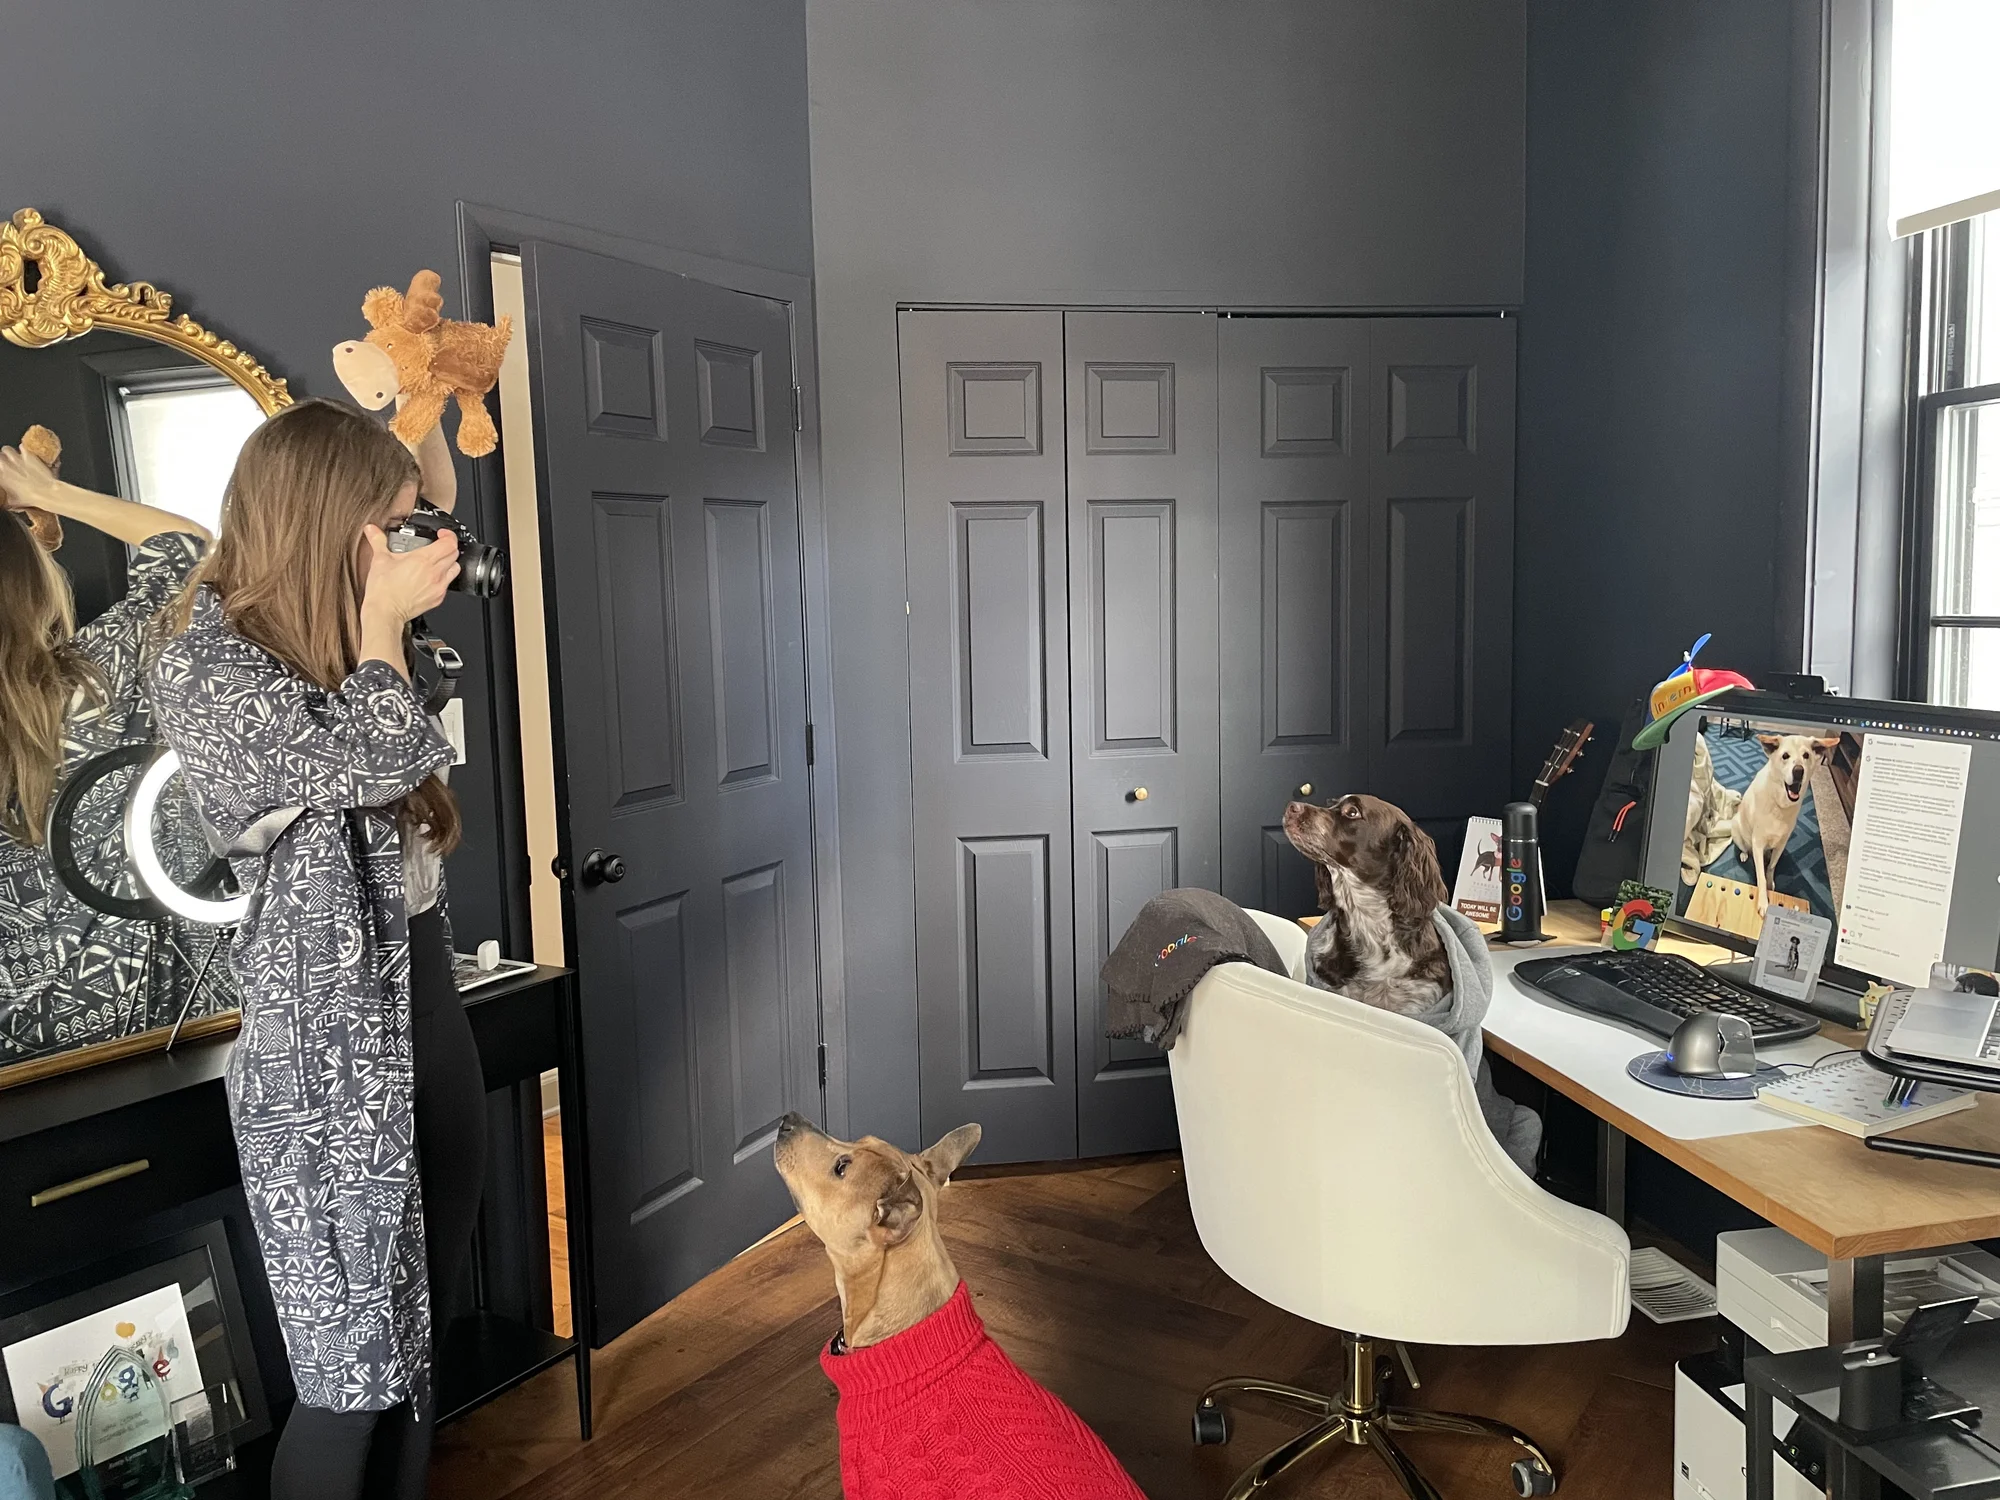 Amy holds a stuffed toy and a digital camera, taking a photo of a brown dog in a red turtleneck sweater. Behind them is a white chair and wooden office desk with a monitor, mouse and keyboard.